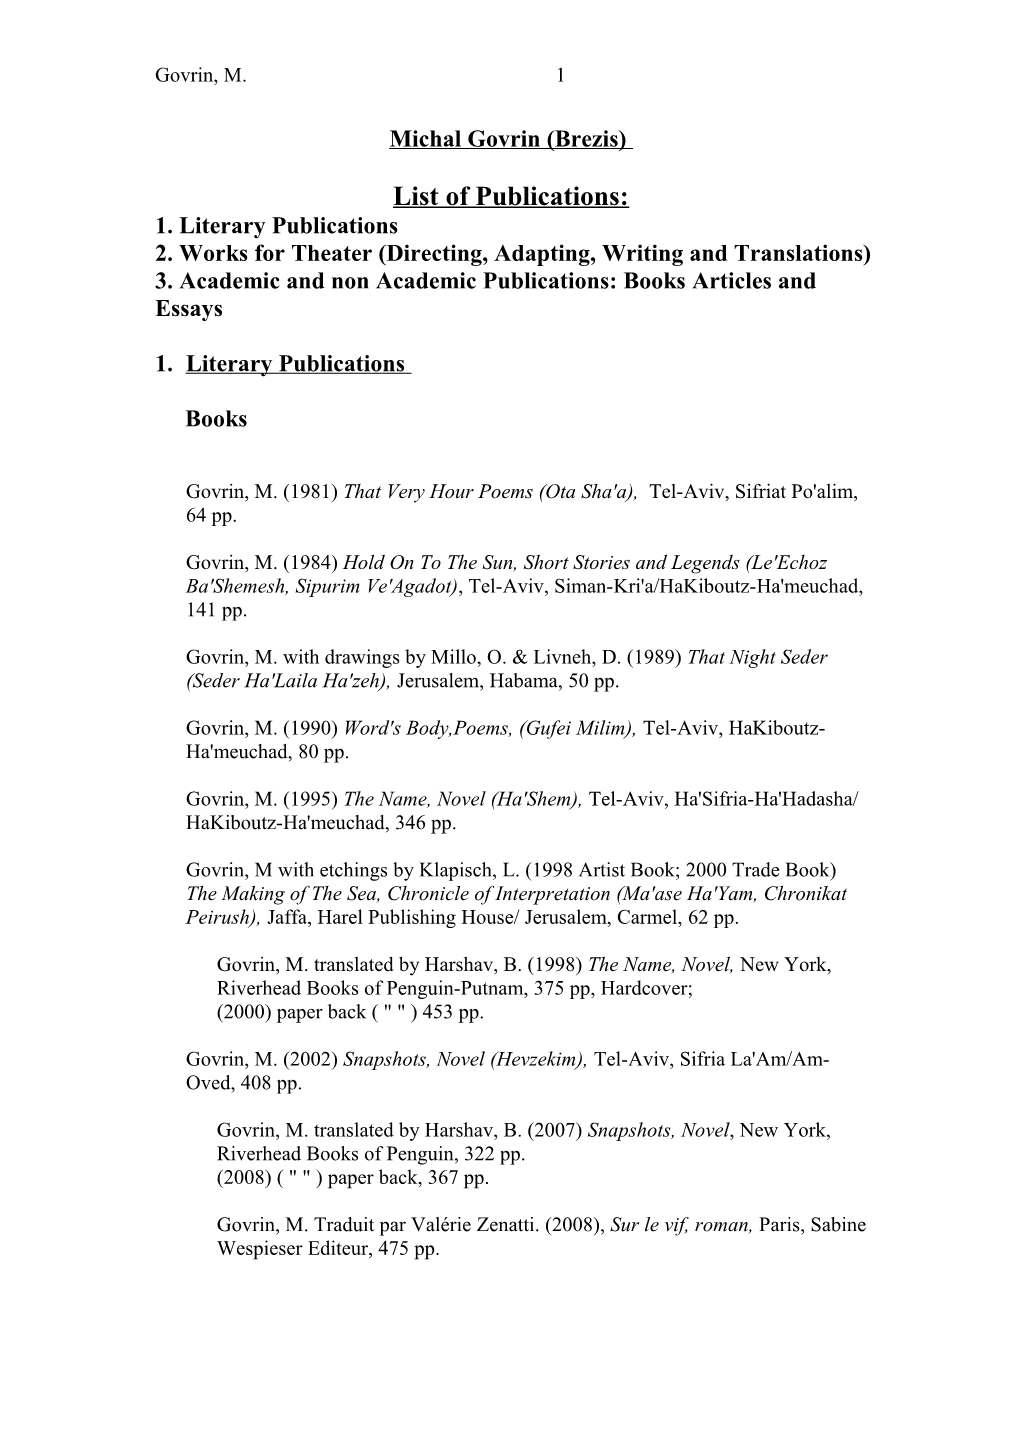 Michal Govrin (Brezis): List of Works and Publications